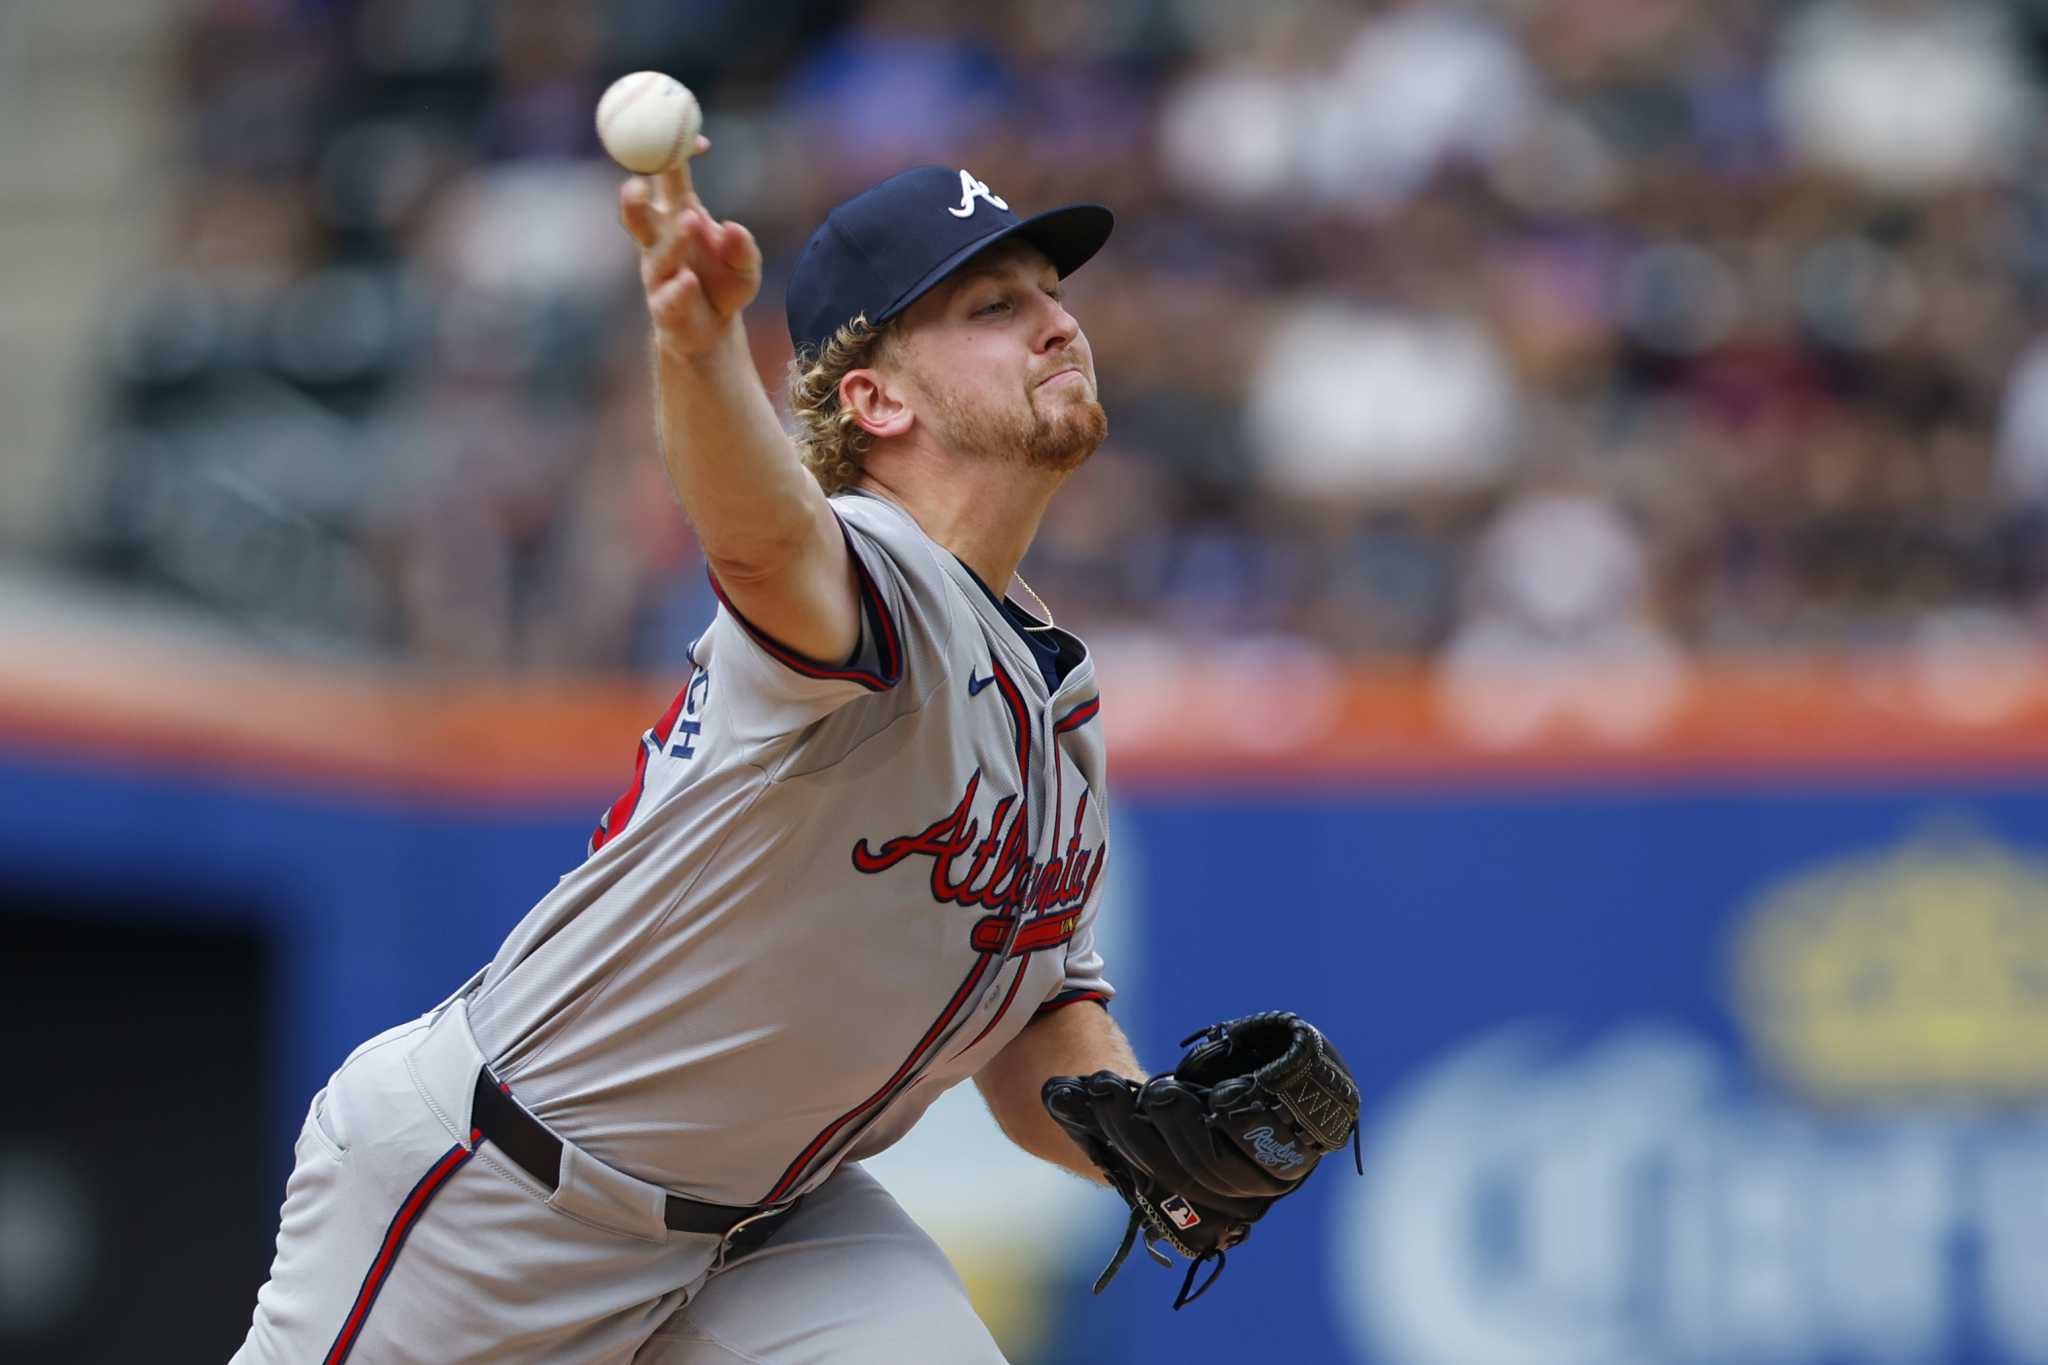 Schwellenbach strikes out 11 and Braves hit 3 homers to snap 6-game skid with 4-0 win over Mets